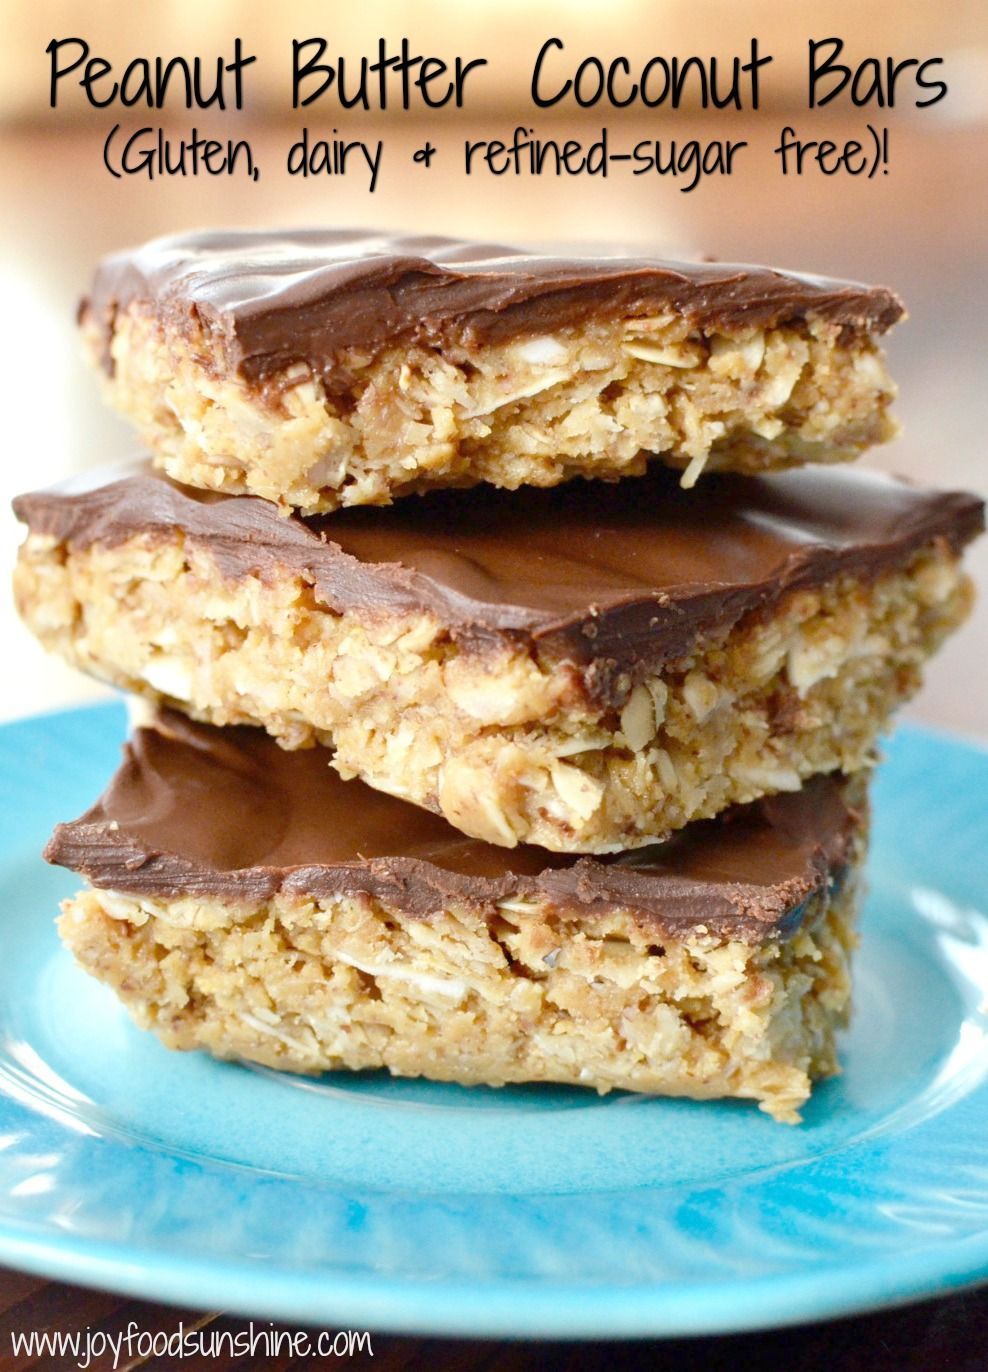 Chocolate Peanut Butter Coconut Bars Recipe! Peanut butter, honey, coconut and oats make up these delicious dessert bars!